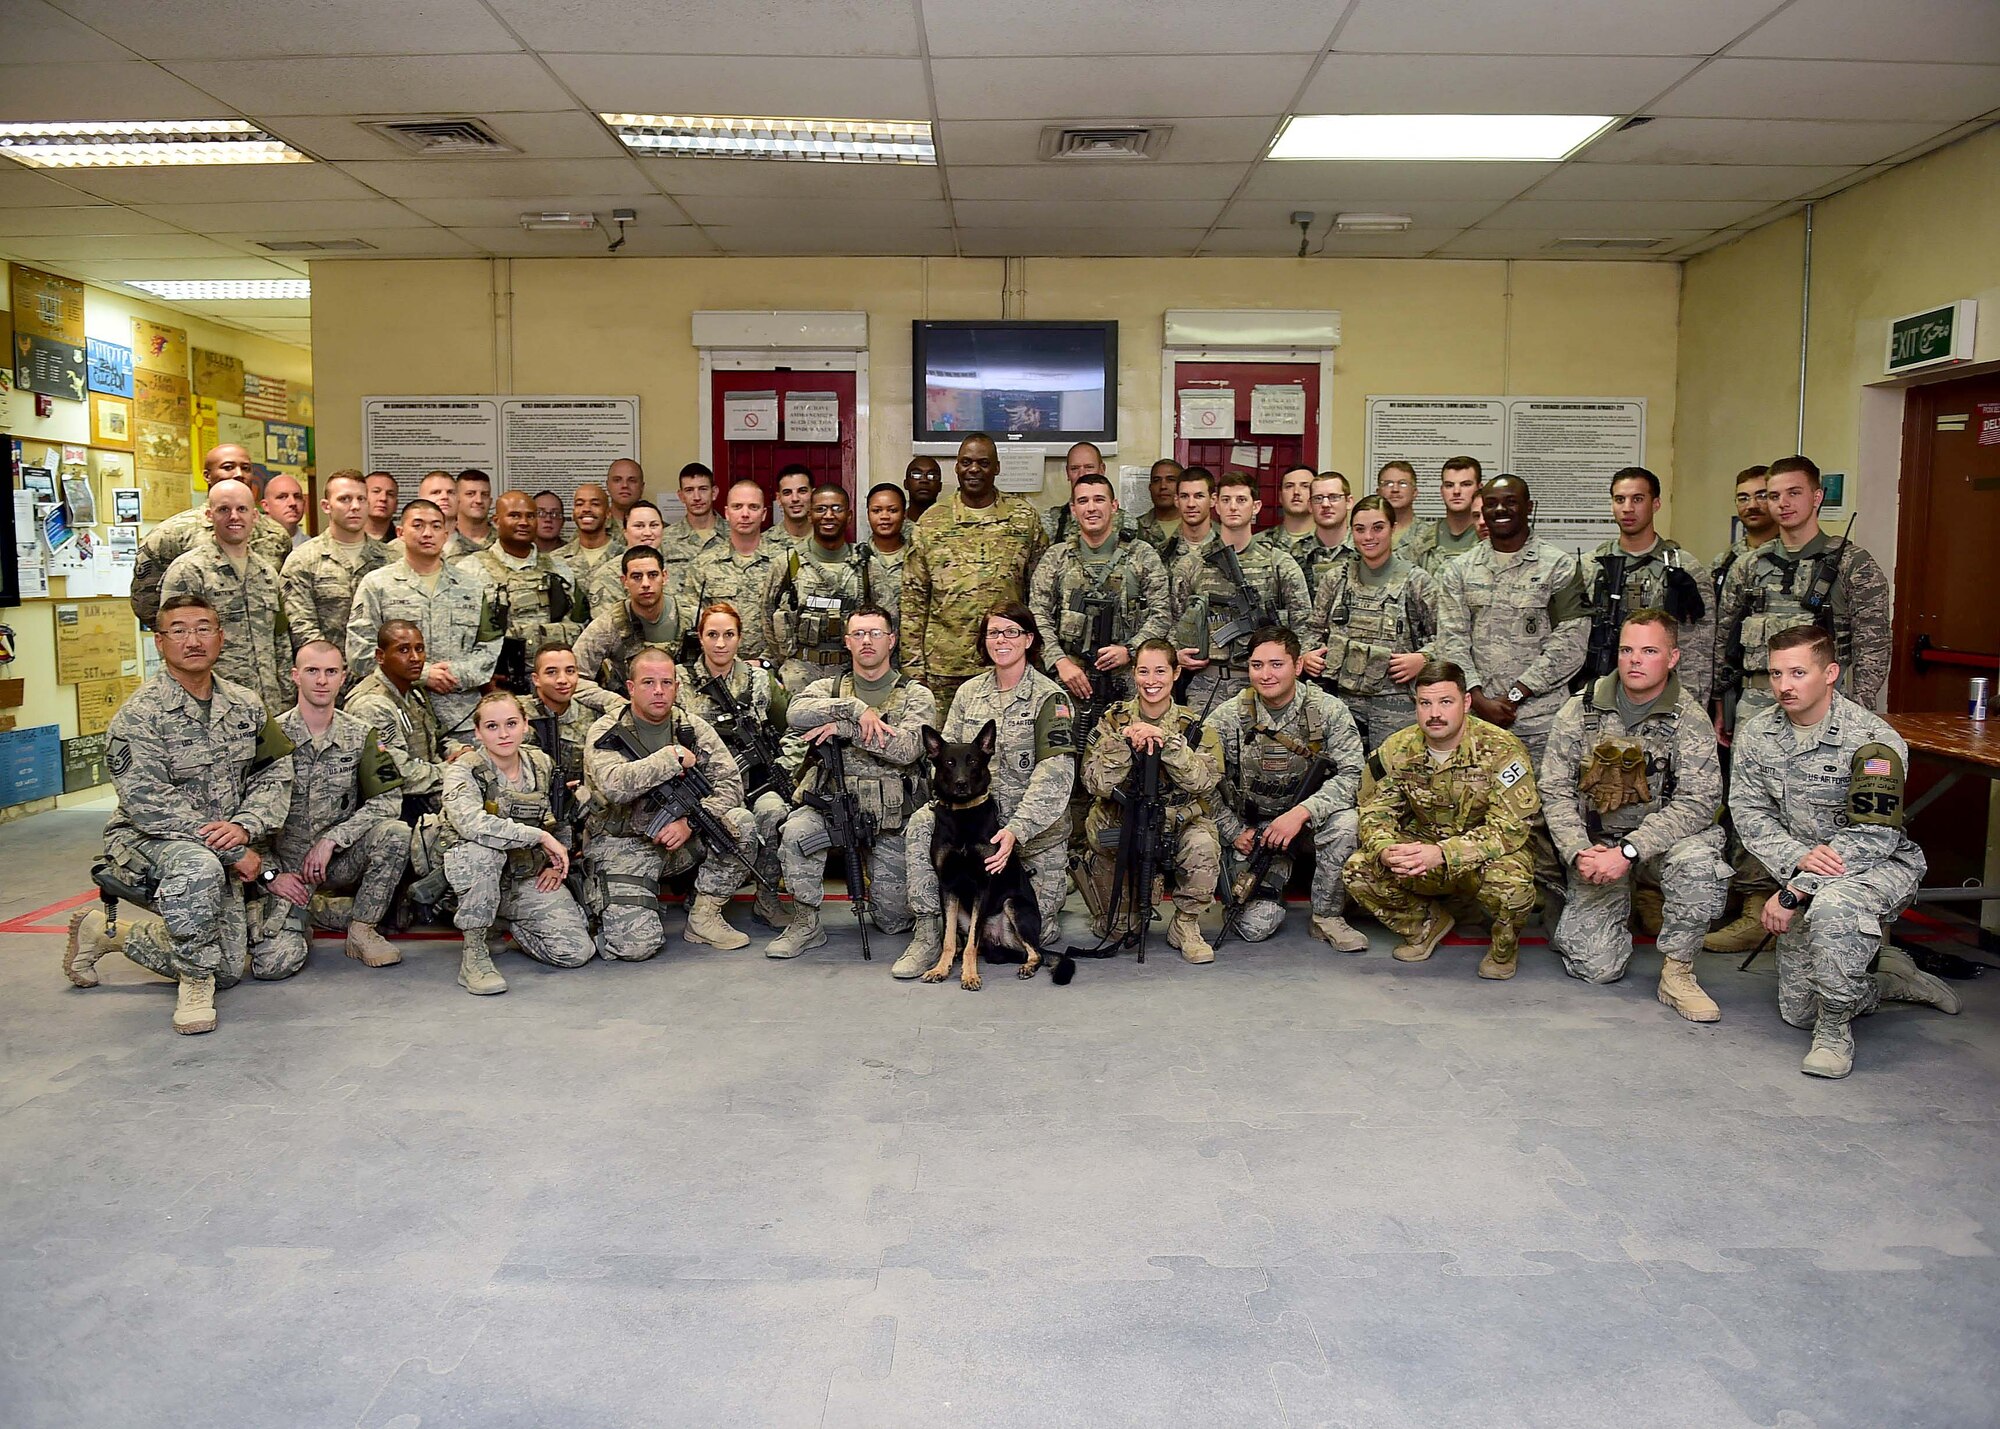 U.S. Army Gen. Lloyd J. Austin III, commander, U.S. Central Command poses for a photo with the 386th Expeditionary Security Forces Squadron at an undisclosed location in Southwest Asia, Nov. 24, 2015. Austin met with Airmen from various units and took the time to thank them for their contribution to the mission and support for the fight against ISIL. (U.S. Air Force photo by Staff Sgt. Jerilyn Quintanilla)